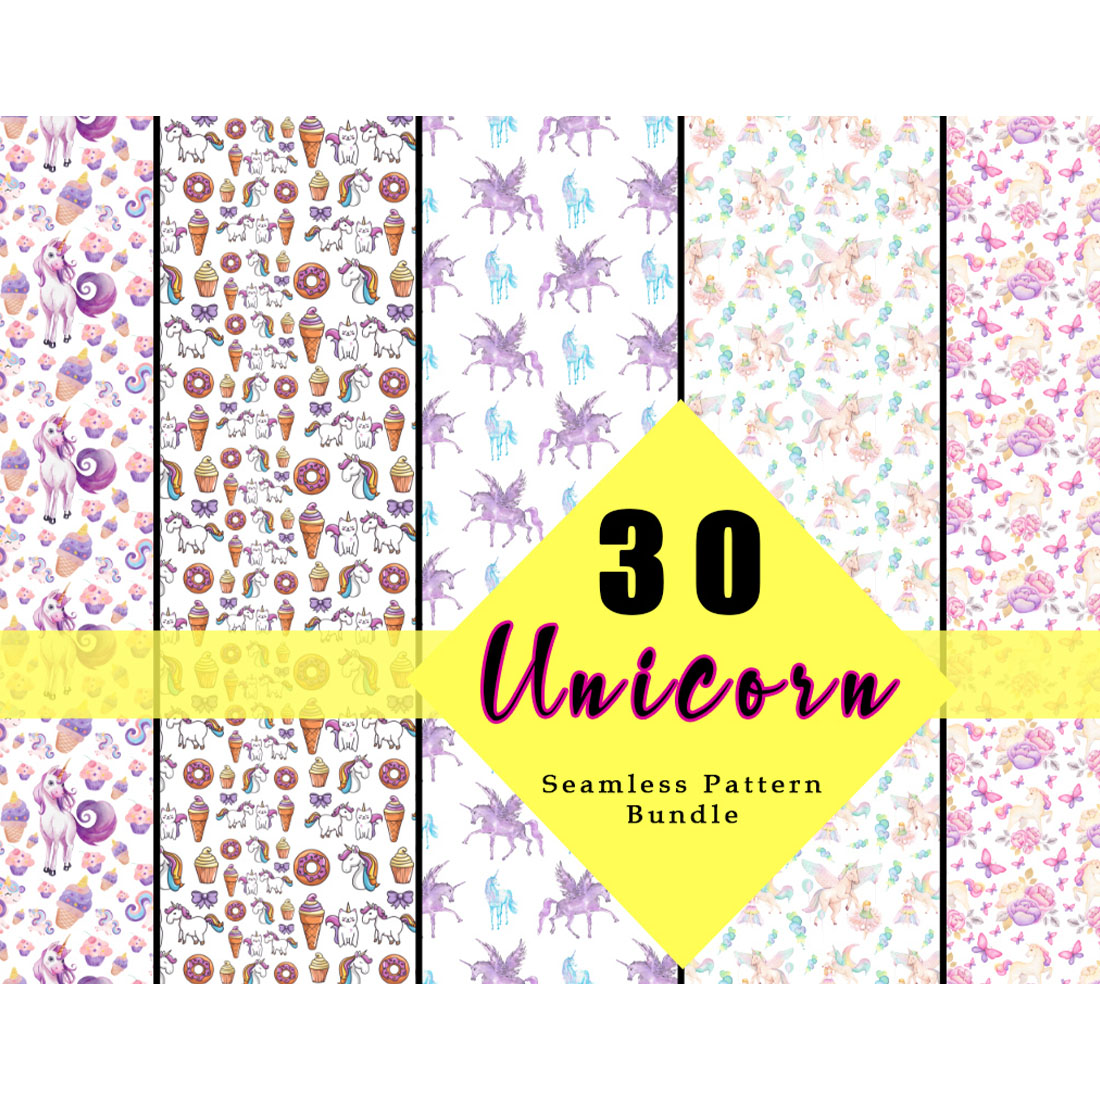 A pack of images of gorgeous patterns with unicorns